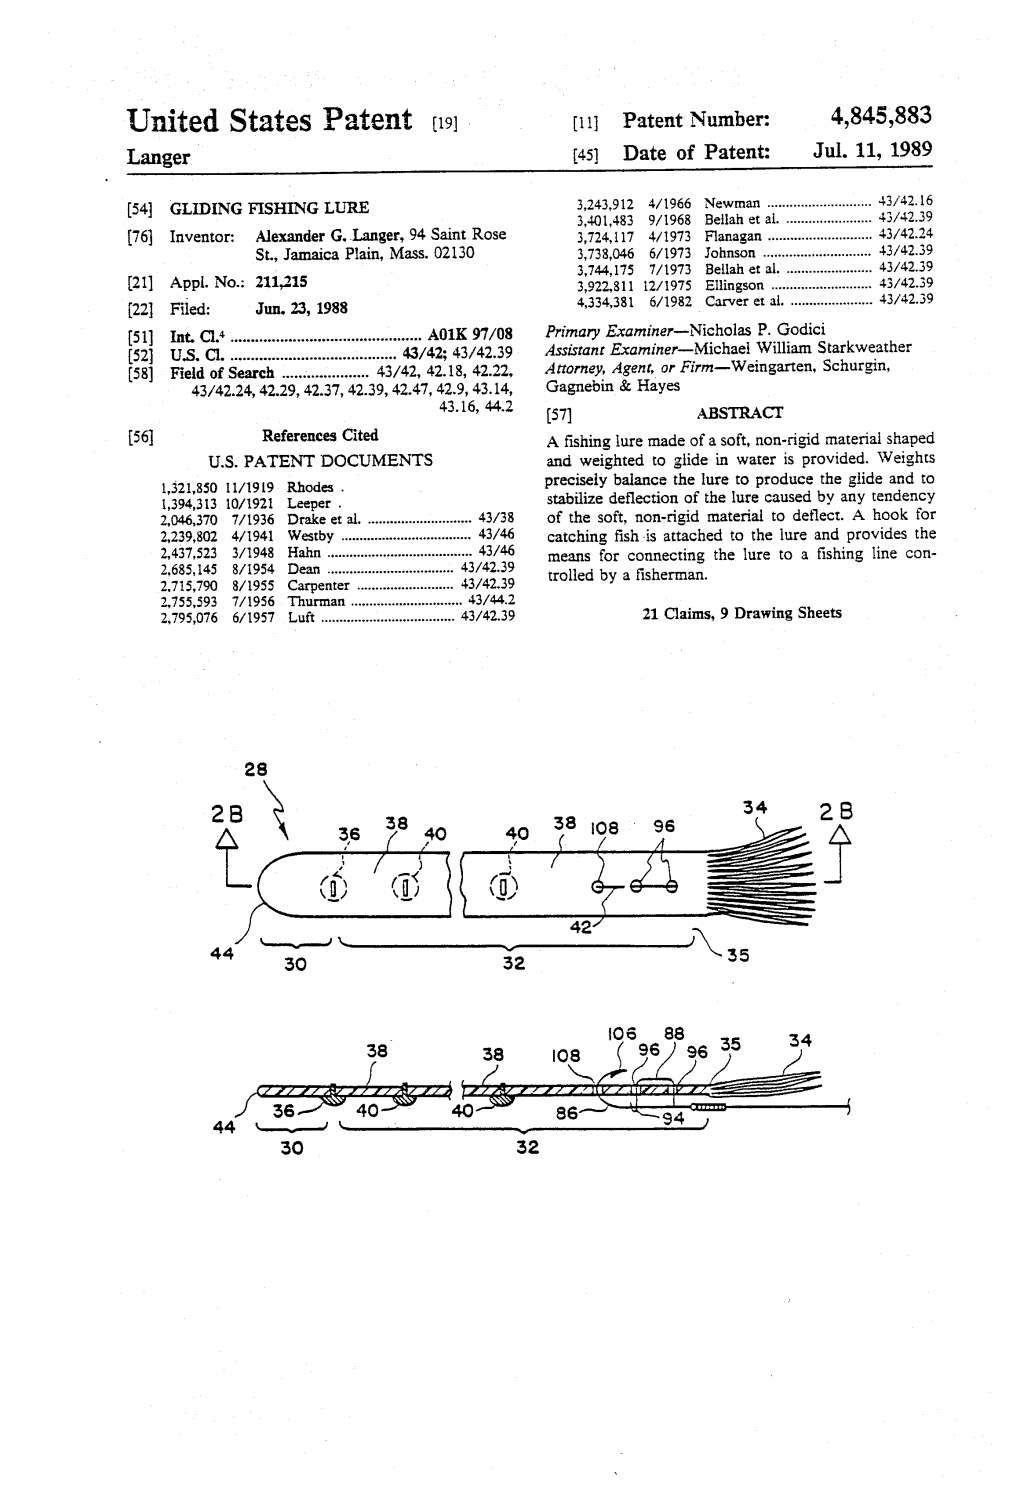 United States Patent (19) 11 Patent Number: 4,845,883 Langer (45) Date of Patent: Jul